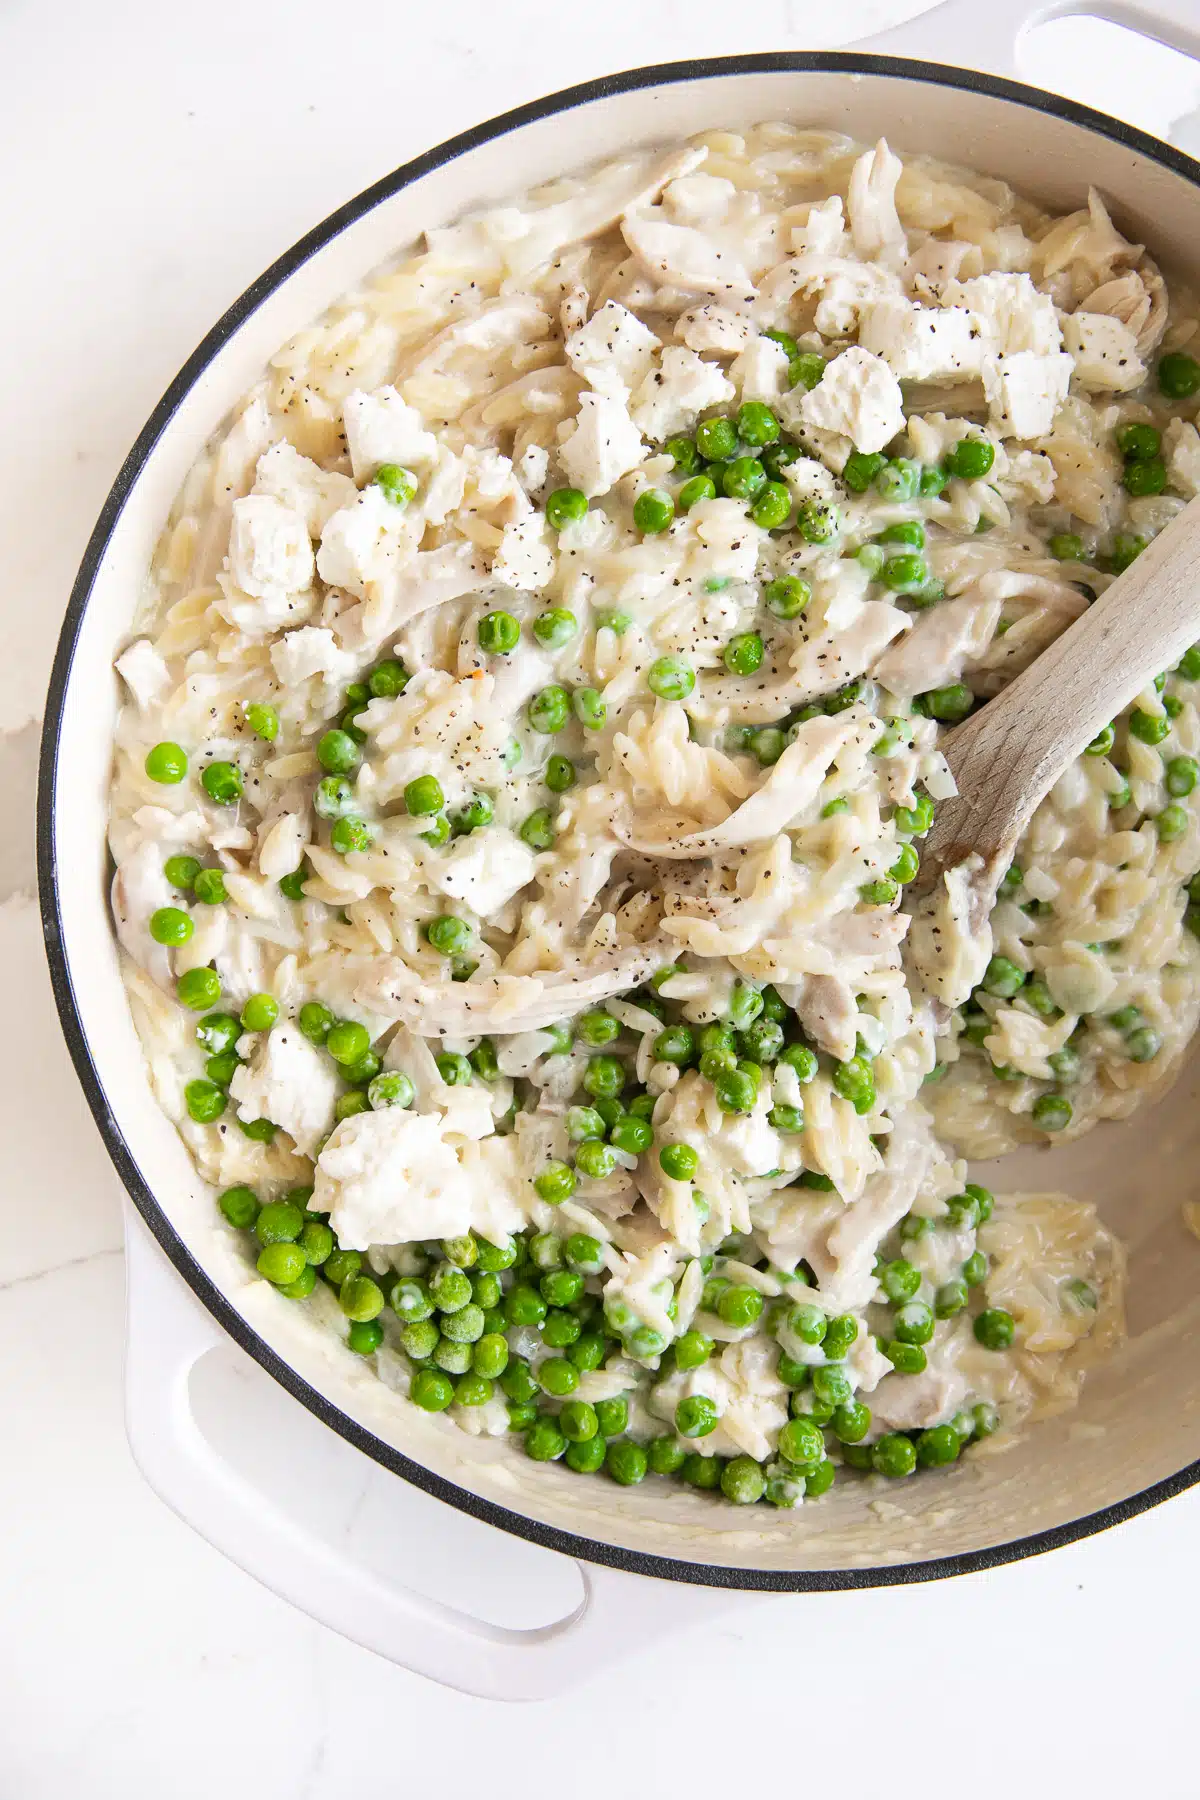 Pan filled with creamy cooked orzo made with lemon, cream, shredded chicken, peas, and feta cheese.